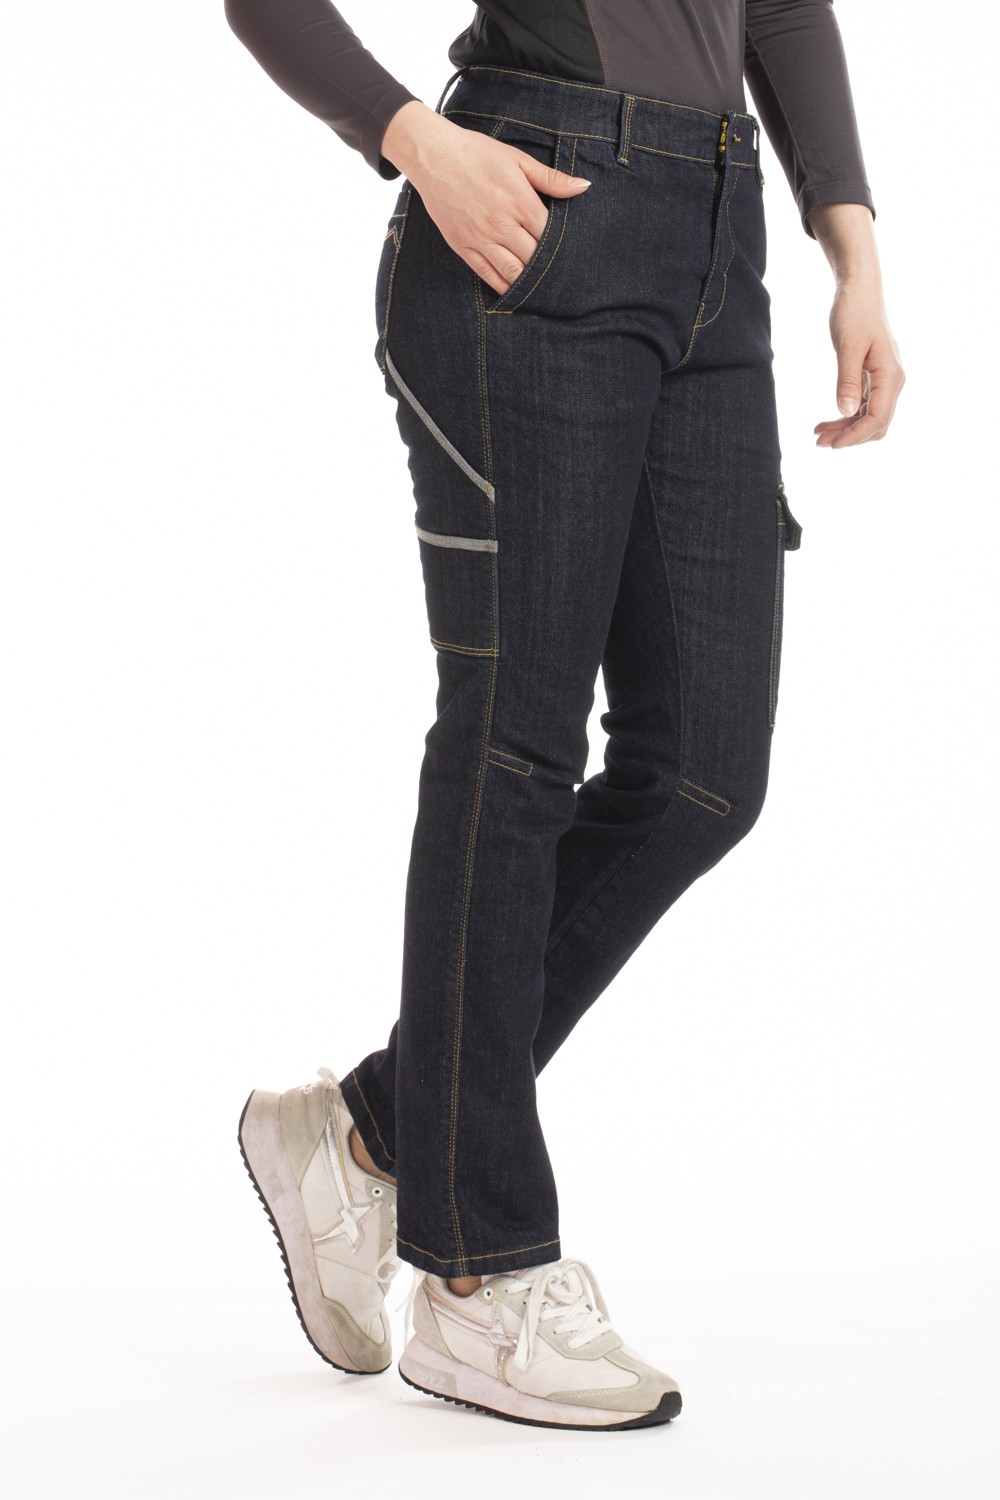 Jeans travail femme confort stretch Betty Rica lewis brut